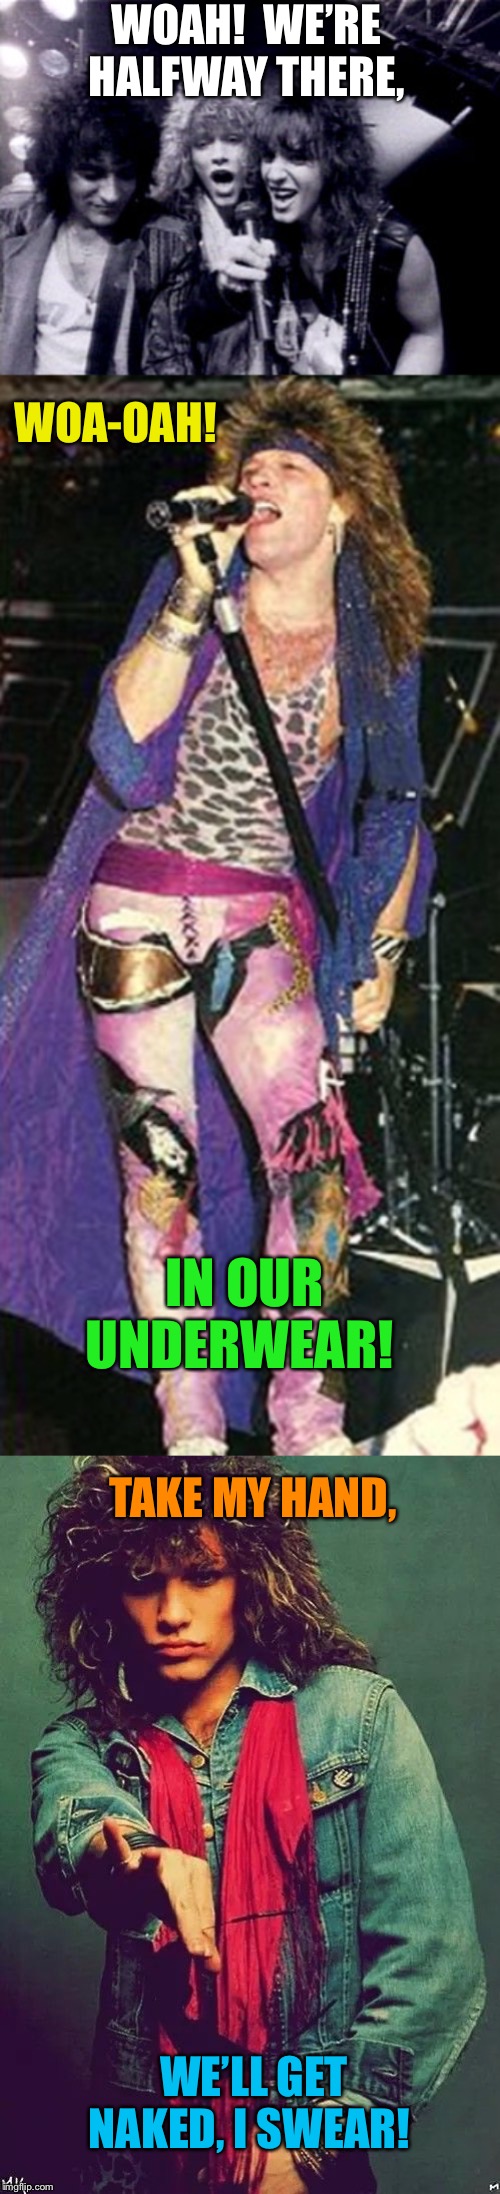 In their underwear | WOAH!  WE’RE HALFWAY THERE, WOA-OAH! IN OUR UNDERWEAR! TAKE MY HAND, WE’LL GET NAKED, I SWEAR! | image tagged in bon jovi | made w/ Imgflip meme maker